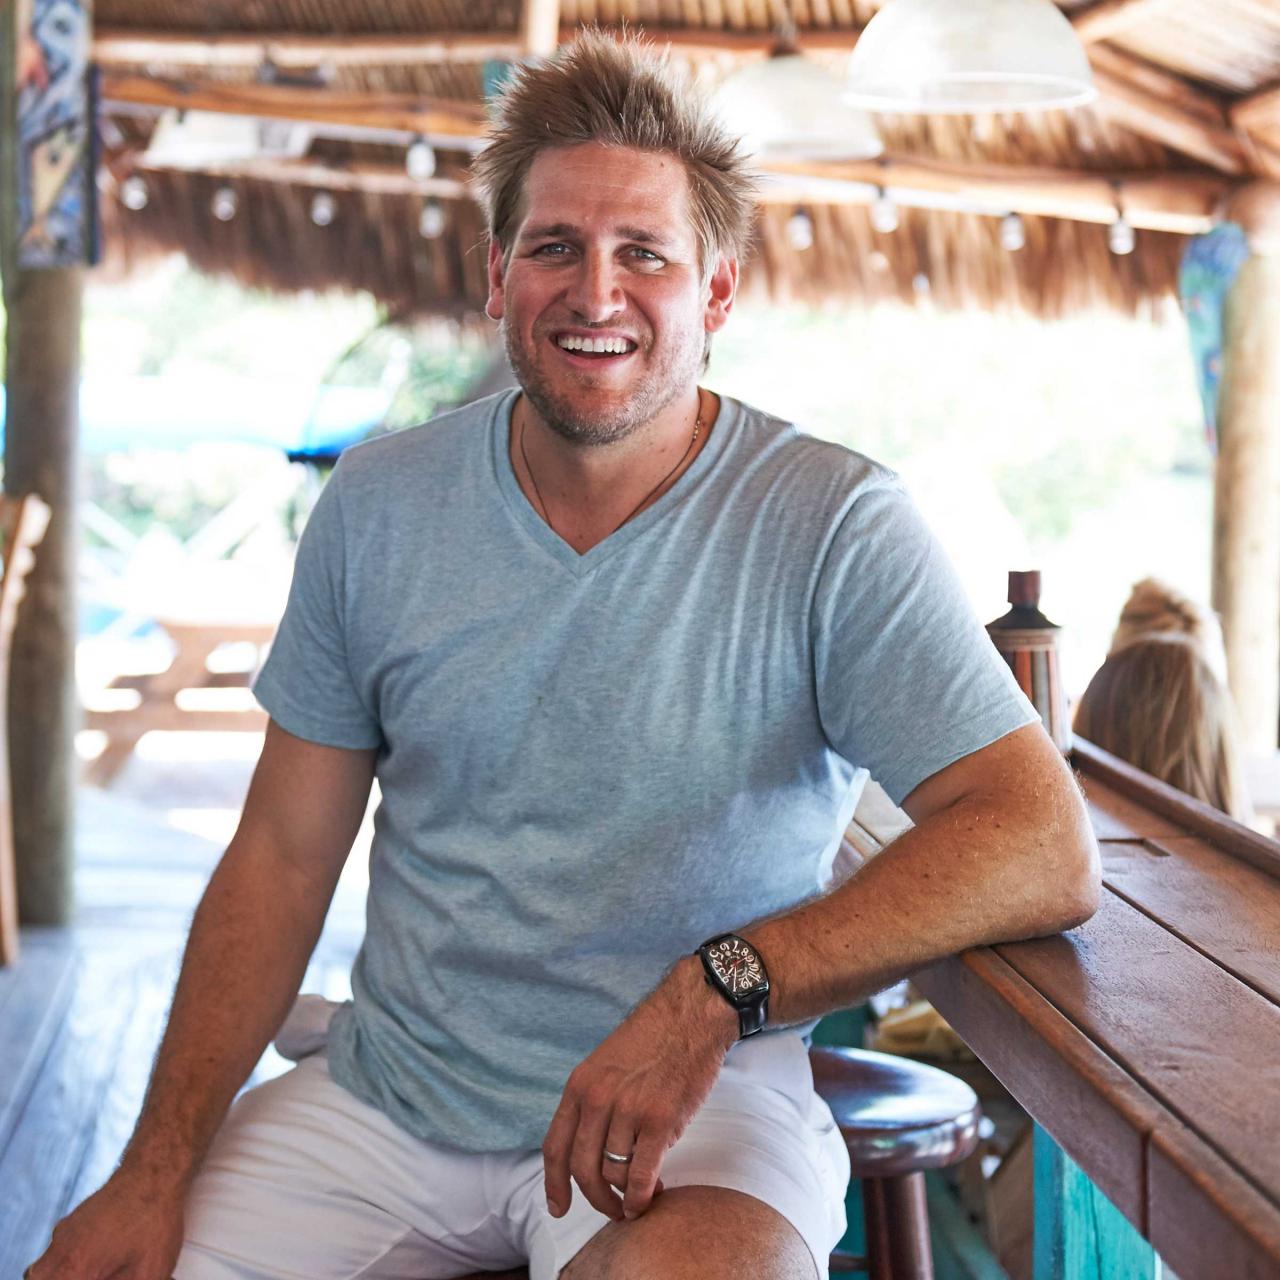 Celebrity chef Curtis Stone on the 3 kitchen products he can't live without